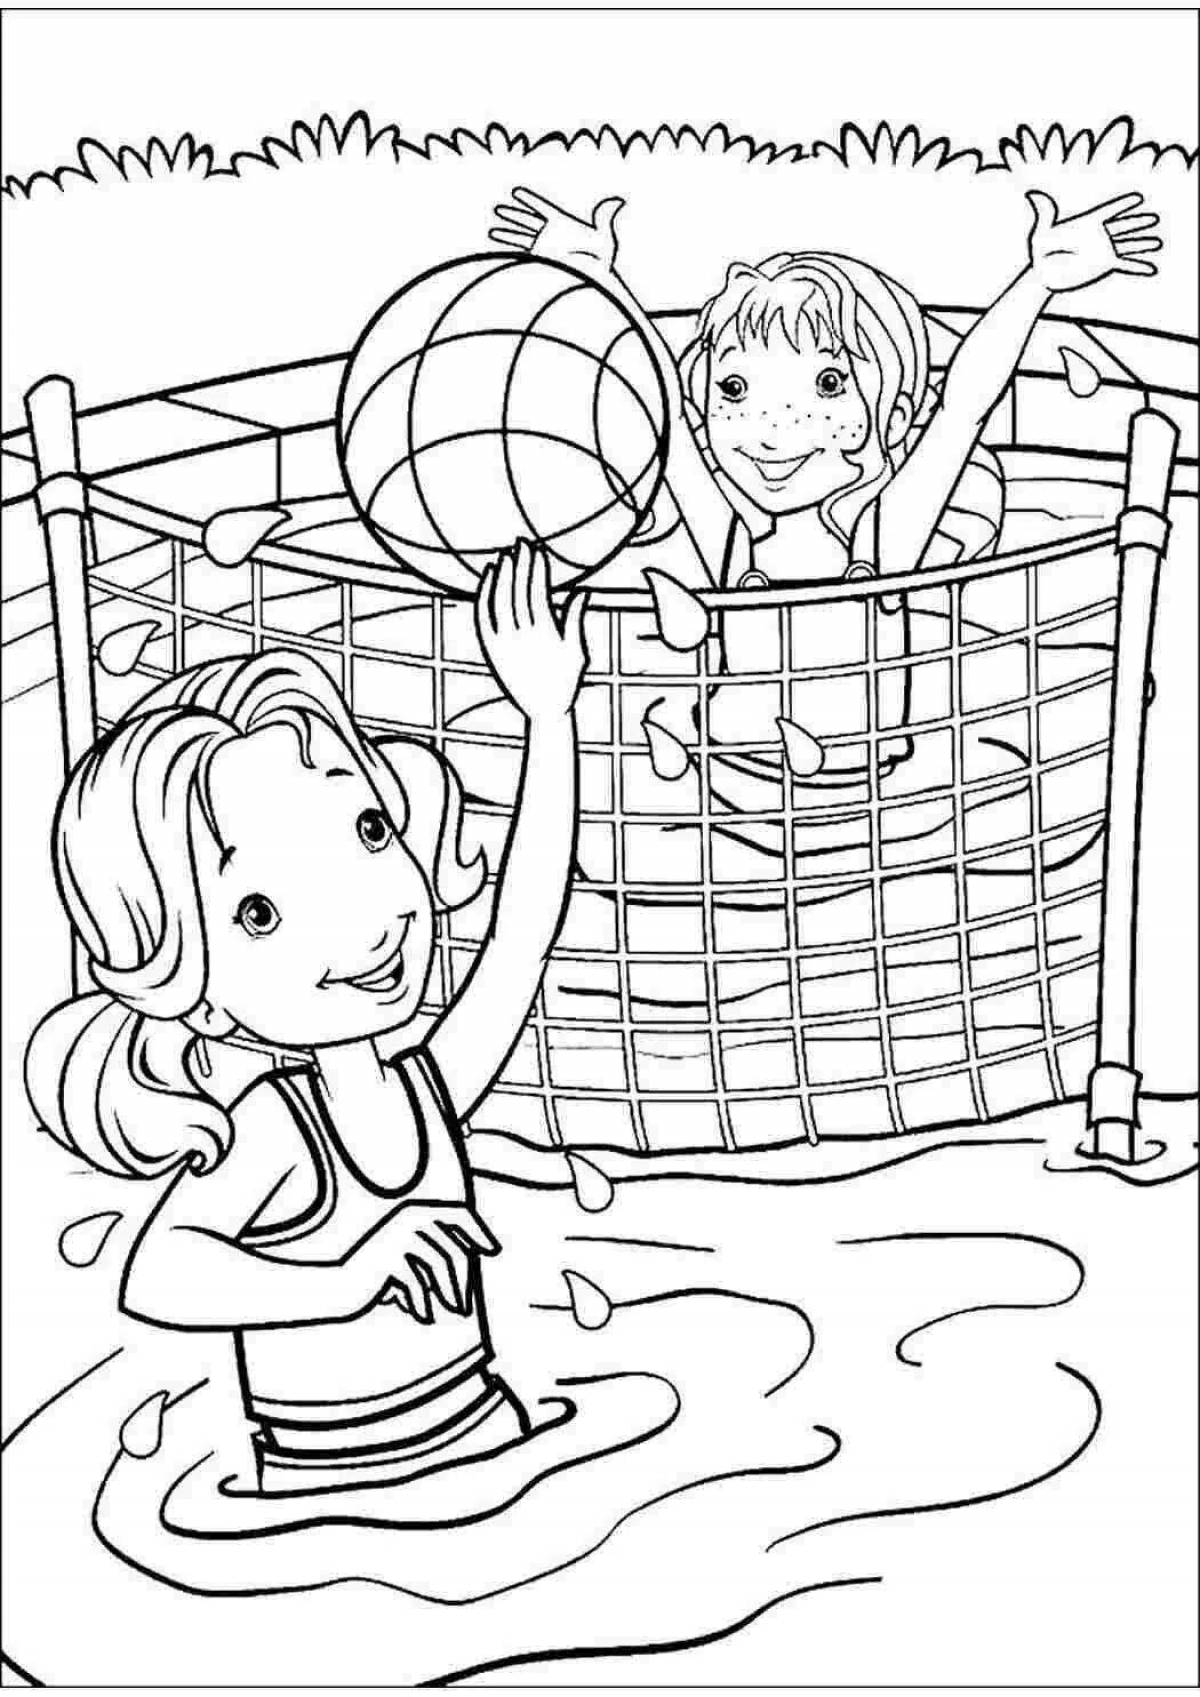 Colorful pre-k volleyball coloring book